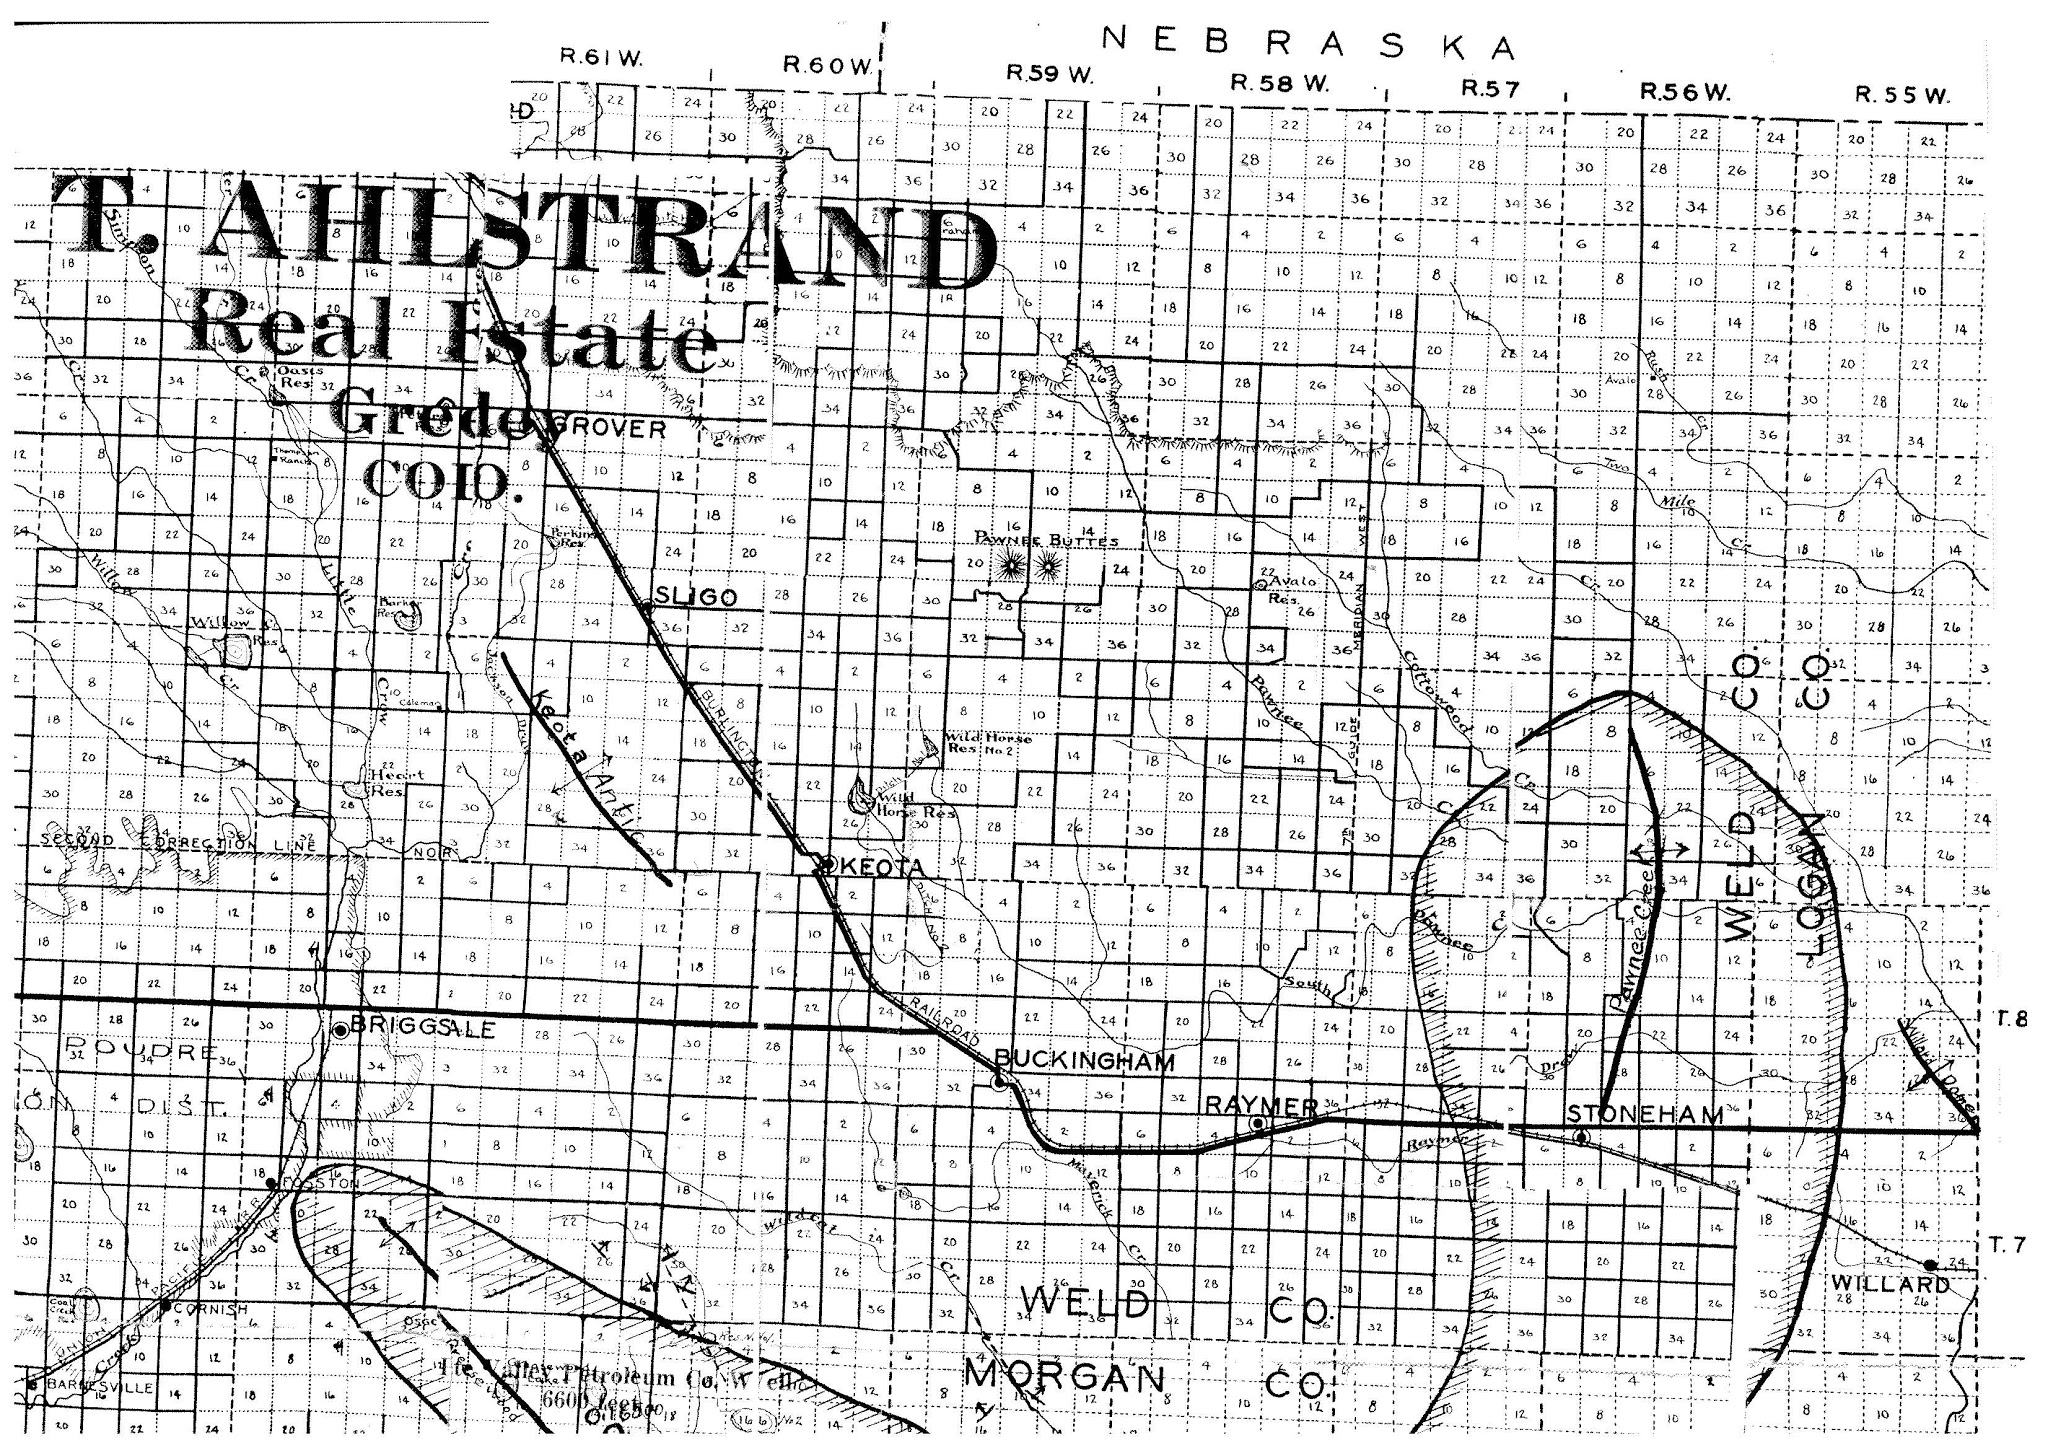 Ahlstrand map section showing land parcels in Northern Colorado